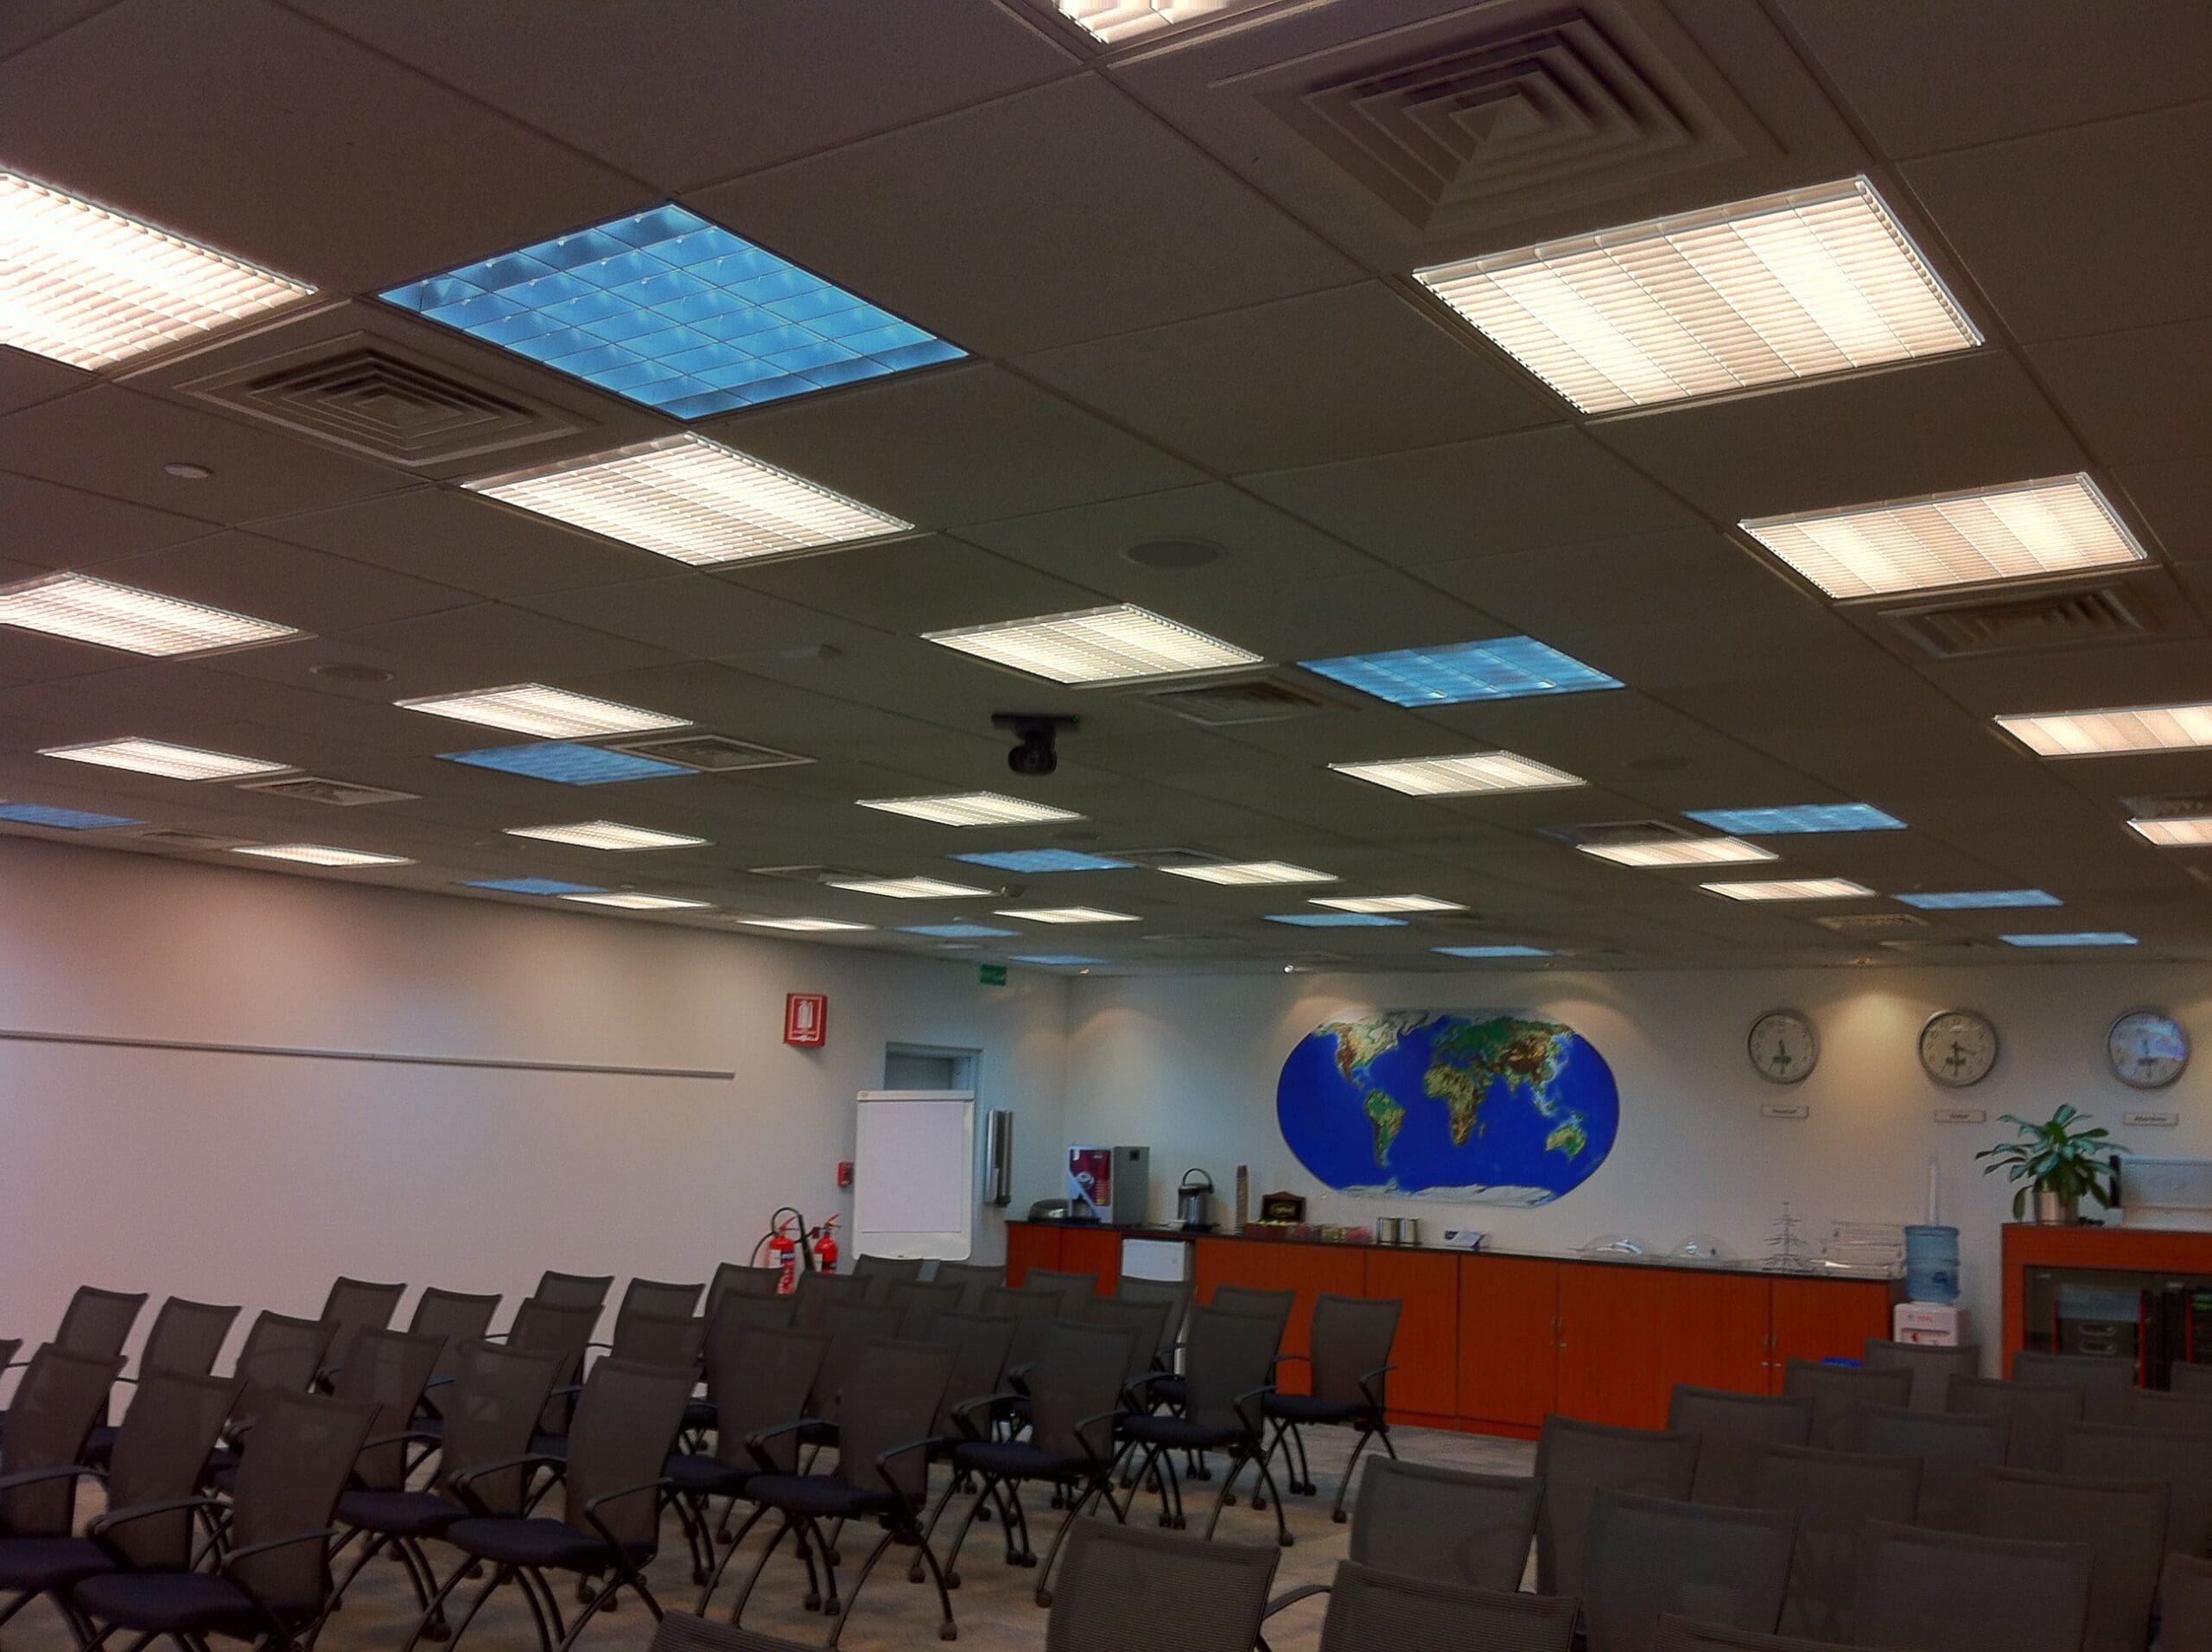 Training room with projection and sound distribution technology.